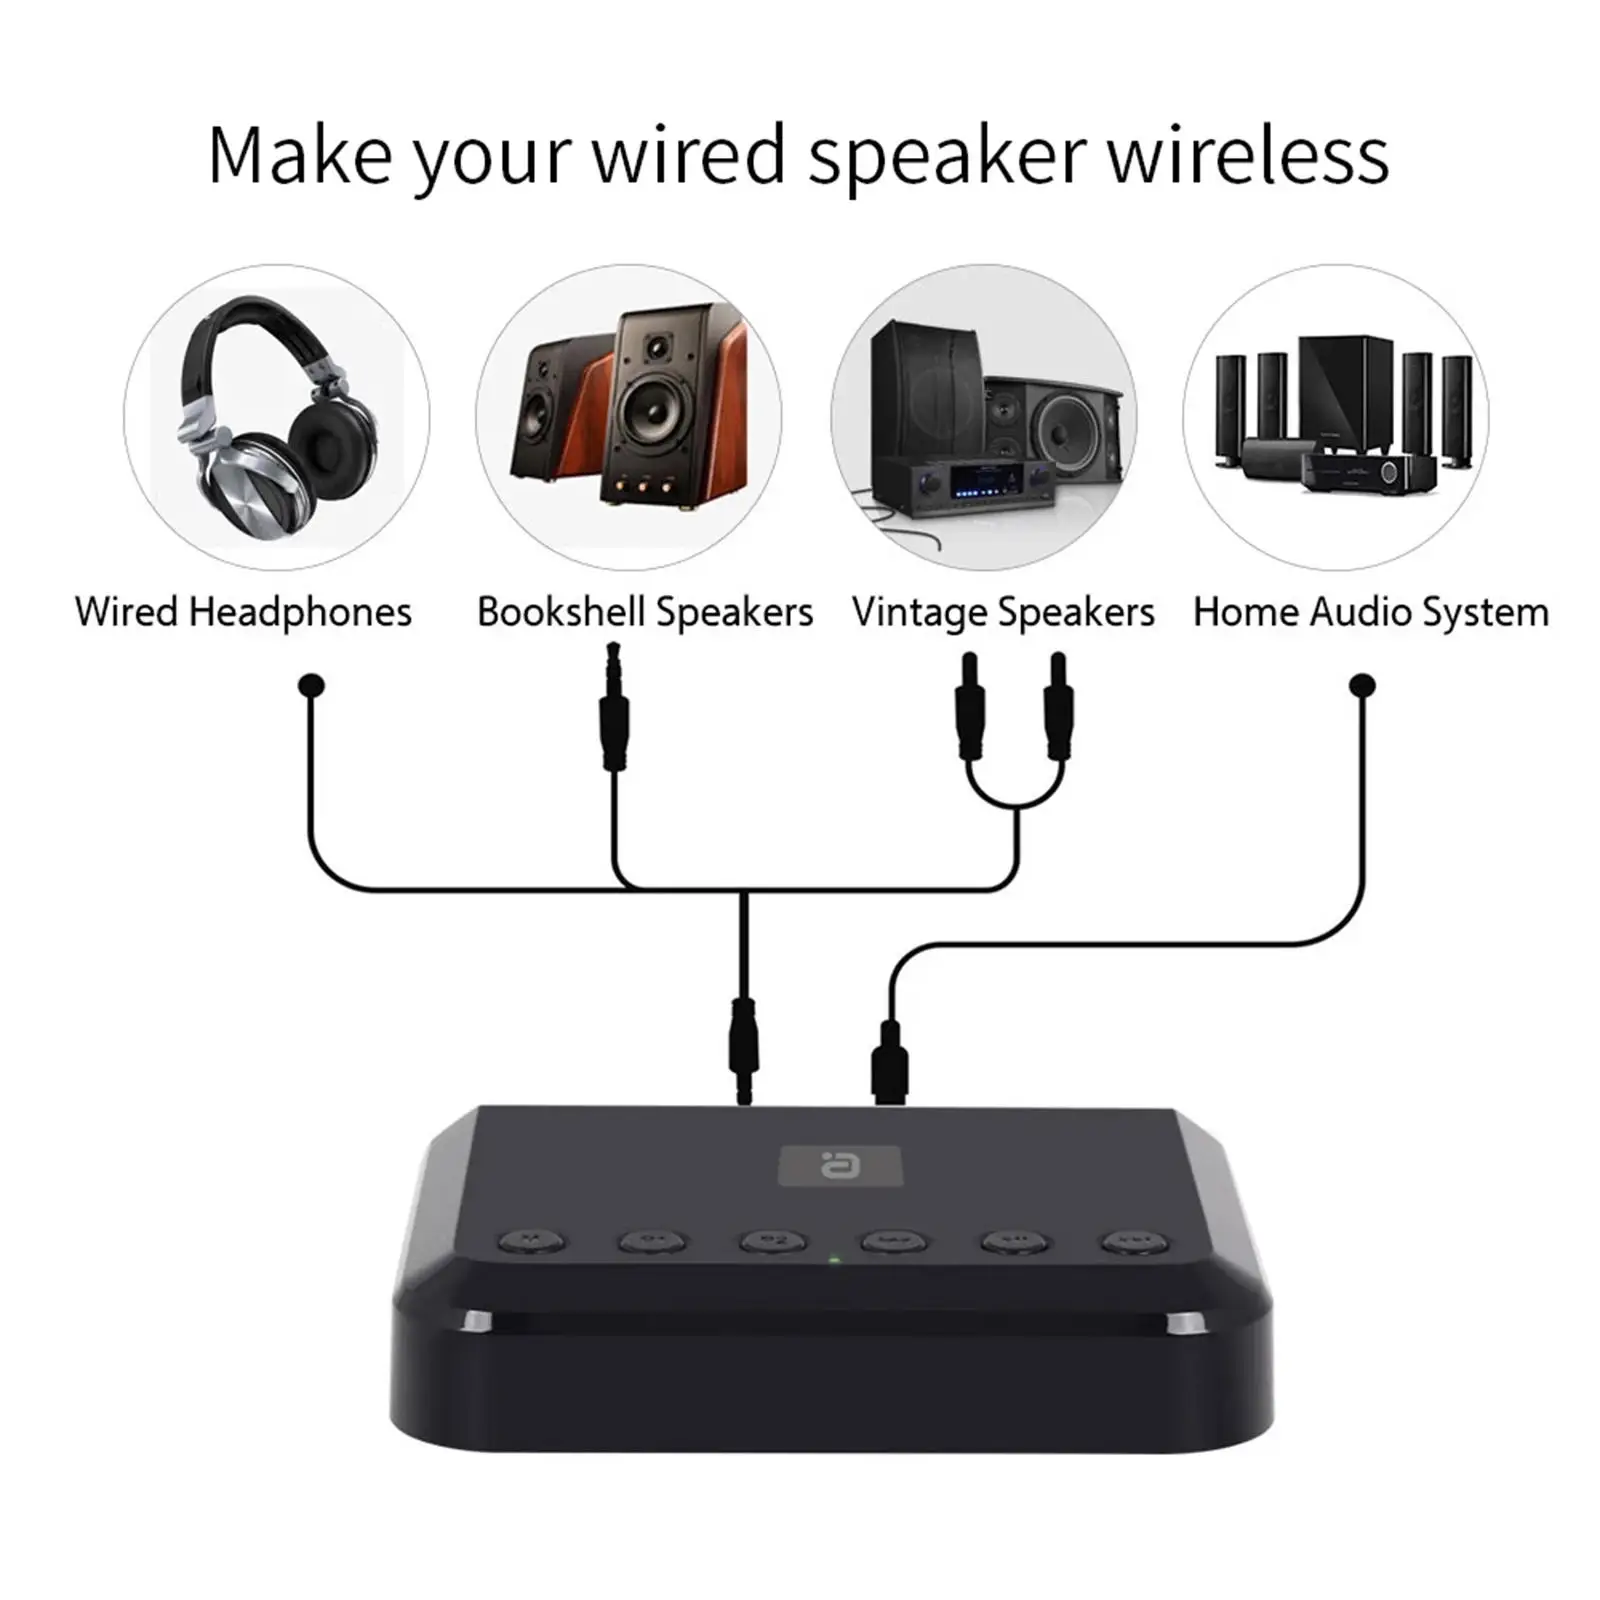 Wireless WiFi Audio Receiver Wr320 3.5mm One Button Link Speaker Systems Smart Bluetooth V4.0 Receiver for Stereo Sound System